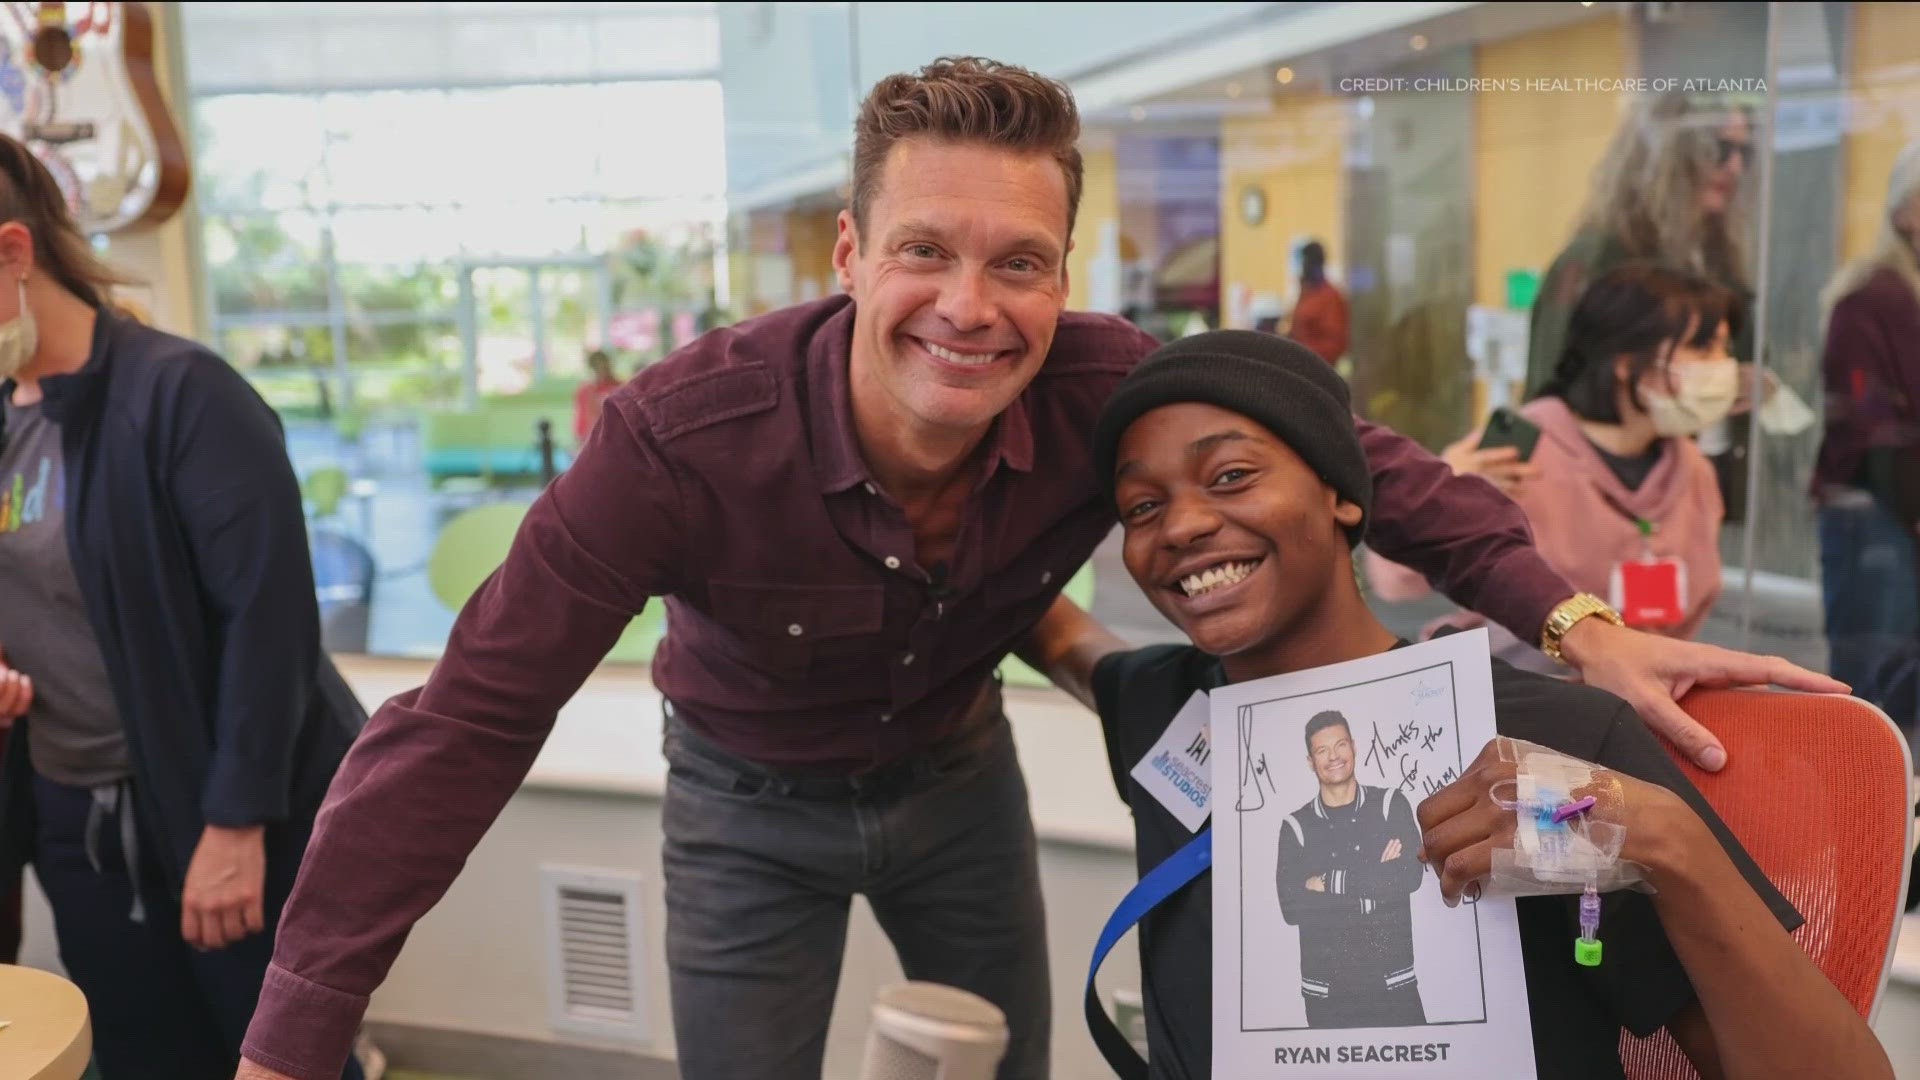 He stopped by on Sunday, April 9, to reminisce on the opening of the first Seacrest Studios, a broadcast media center, at pediatric hospitals.